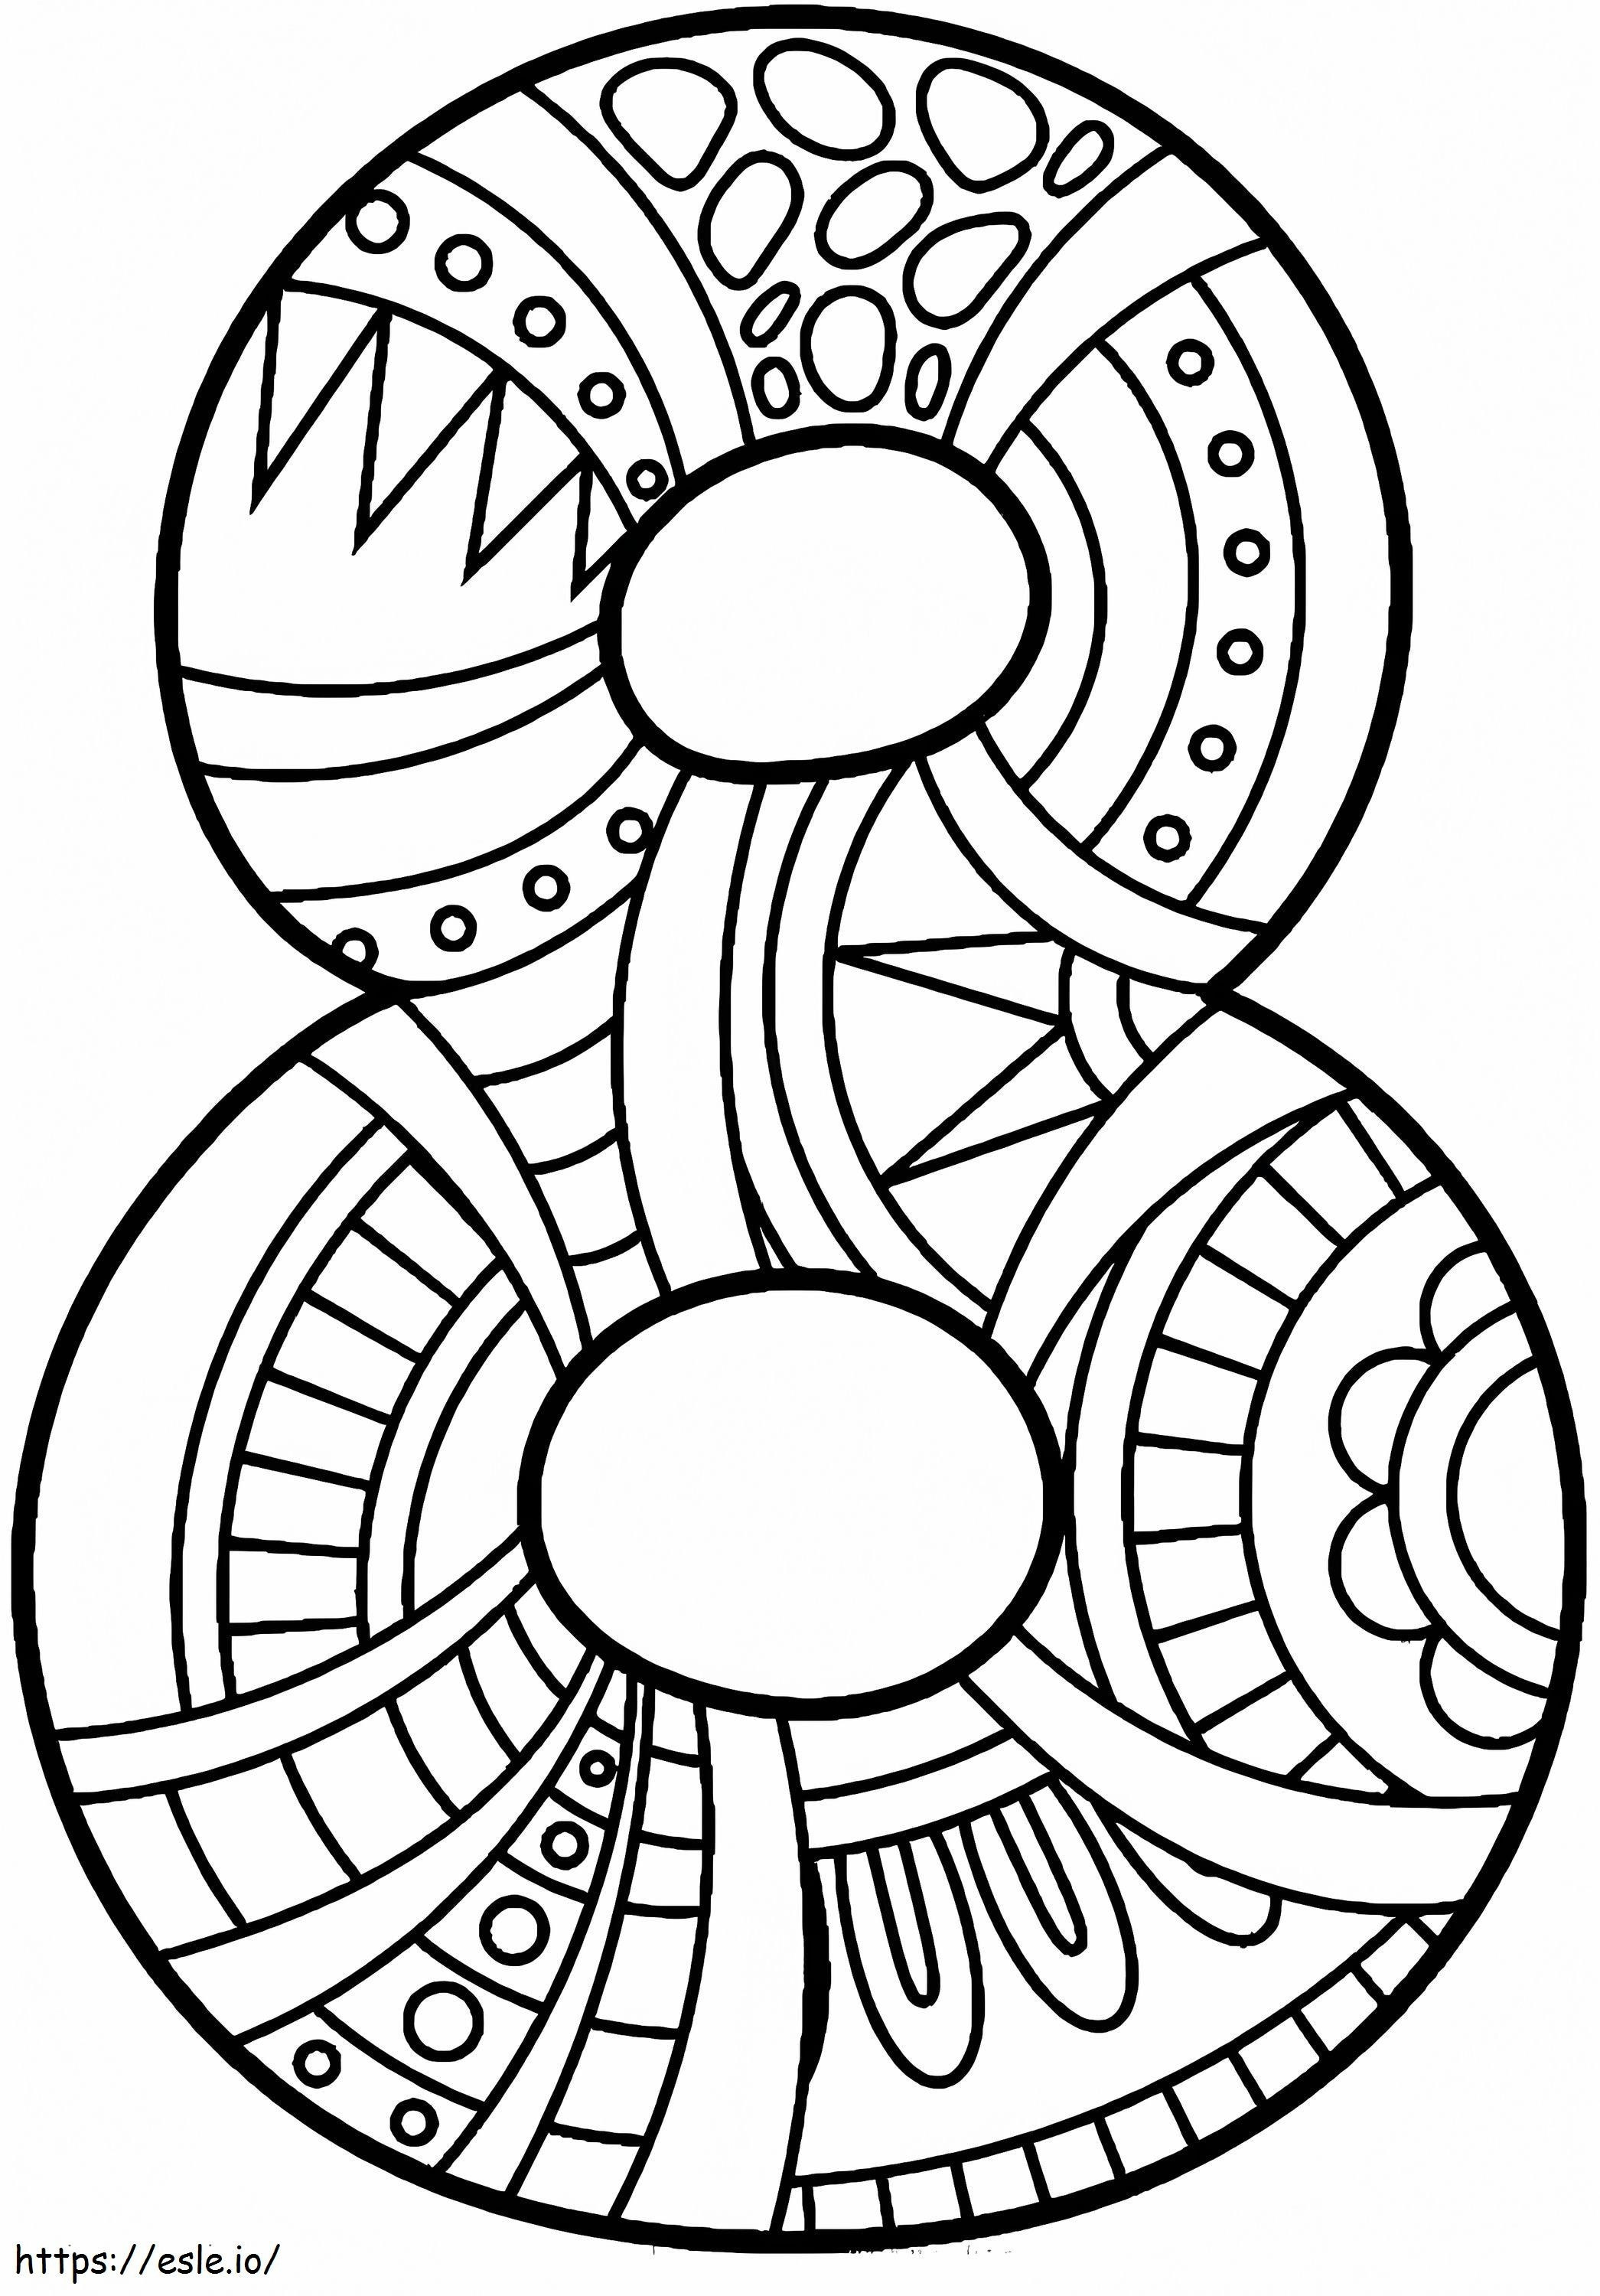 Number 8 Zentangle coloring page